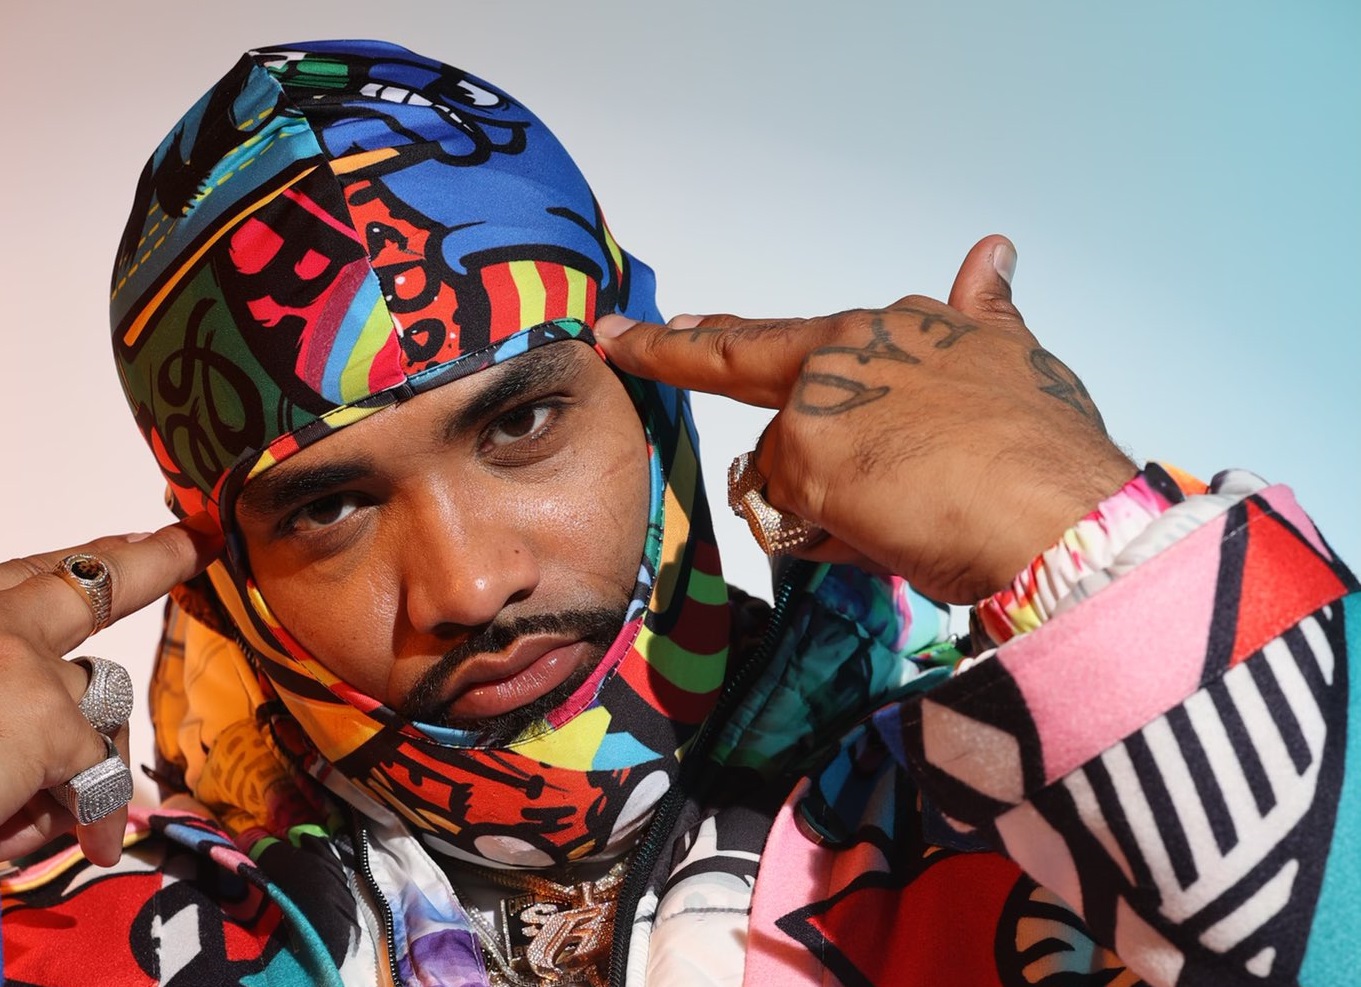 Joyner Lucas Selects Four Emerging Artists To Collab for a Remix to His 